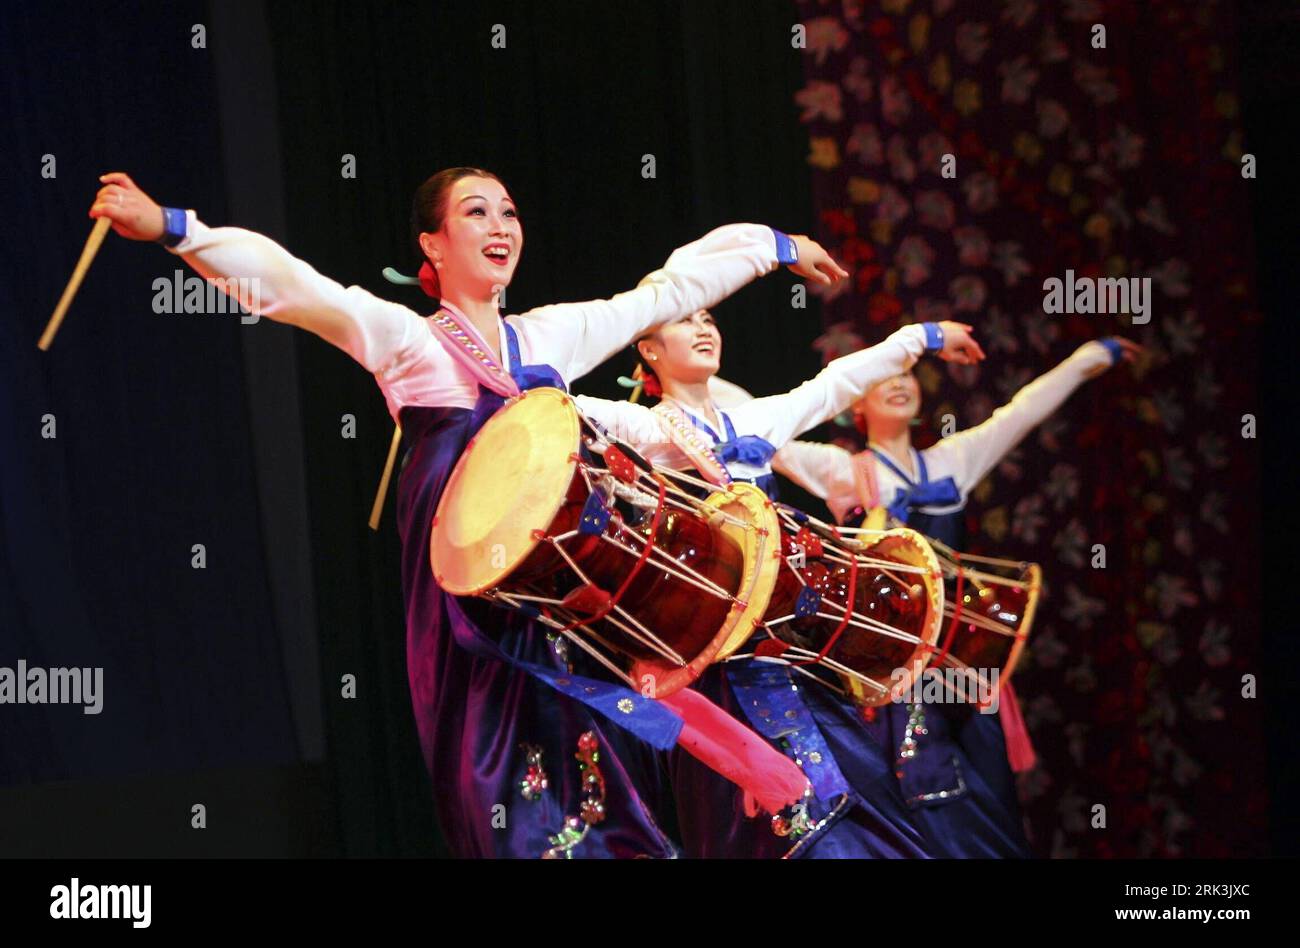 Bildnummer: 53523274  Datum: 10.10.2009  Copyright: imago/Xinhua (091011) -- WENZHOU, Oct. 11, 2009 (Xinhua) -- Dancers of the Pyongyang Art Troupe of the Democratic  s Republic of Korea (DPRK) perform at the Dongnan Theater in Wenzhou, east China s Zhejiang Province, Oct. 10, 2009. More than 20 wonderful programs, including the long drum dance and fan dance, were shown to audiences of Wenzhou on Saturday. (Xinhua/Zheng Peng) (mcg) (1)CHINA-ZHEJIANG-WENZHOU-PERFORMANCE (CN) PUBLICATIONxNOTxINxCHN Musik Aktion Nordkorea kbdig xsk 2009 quer o0 Trommler, Trommel    Bildnummer 53523274 Date 10 10 Stock Photo